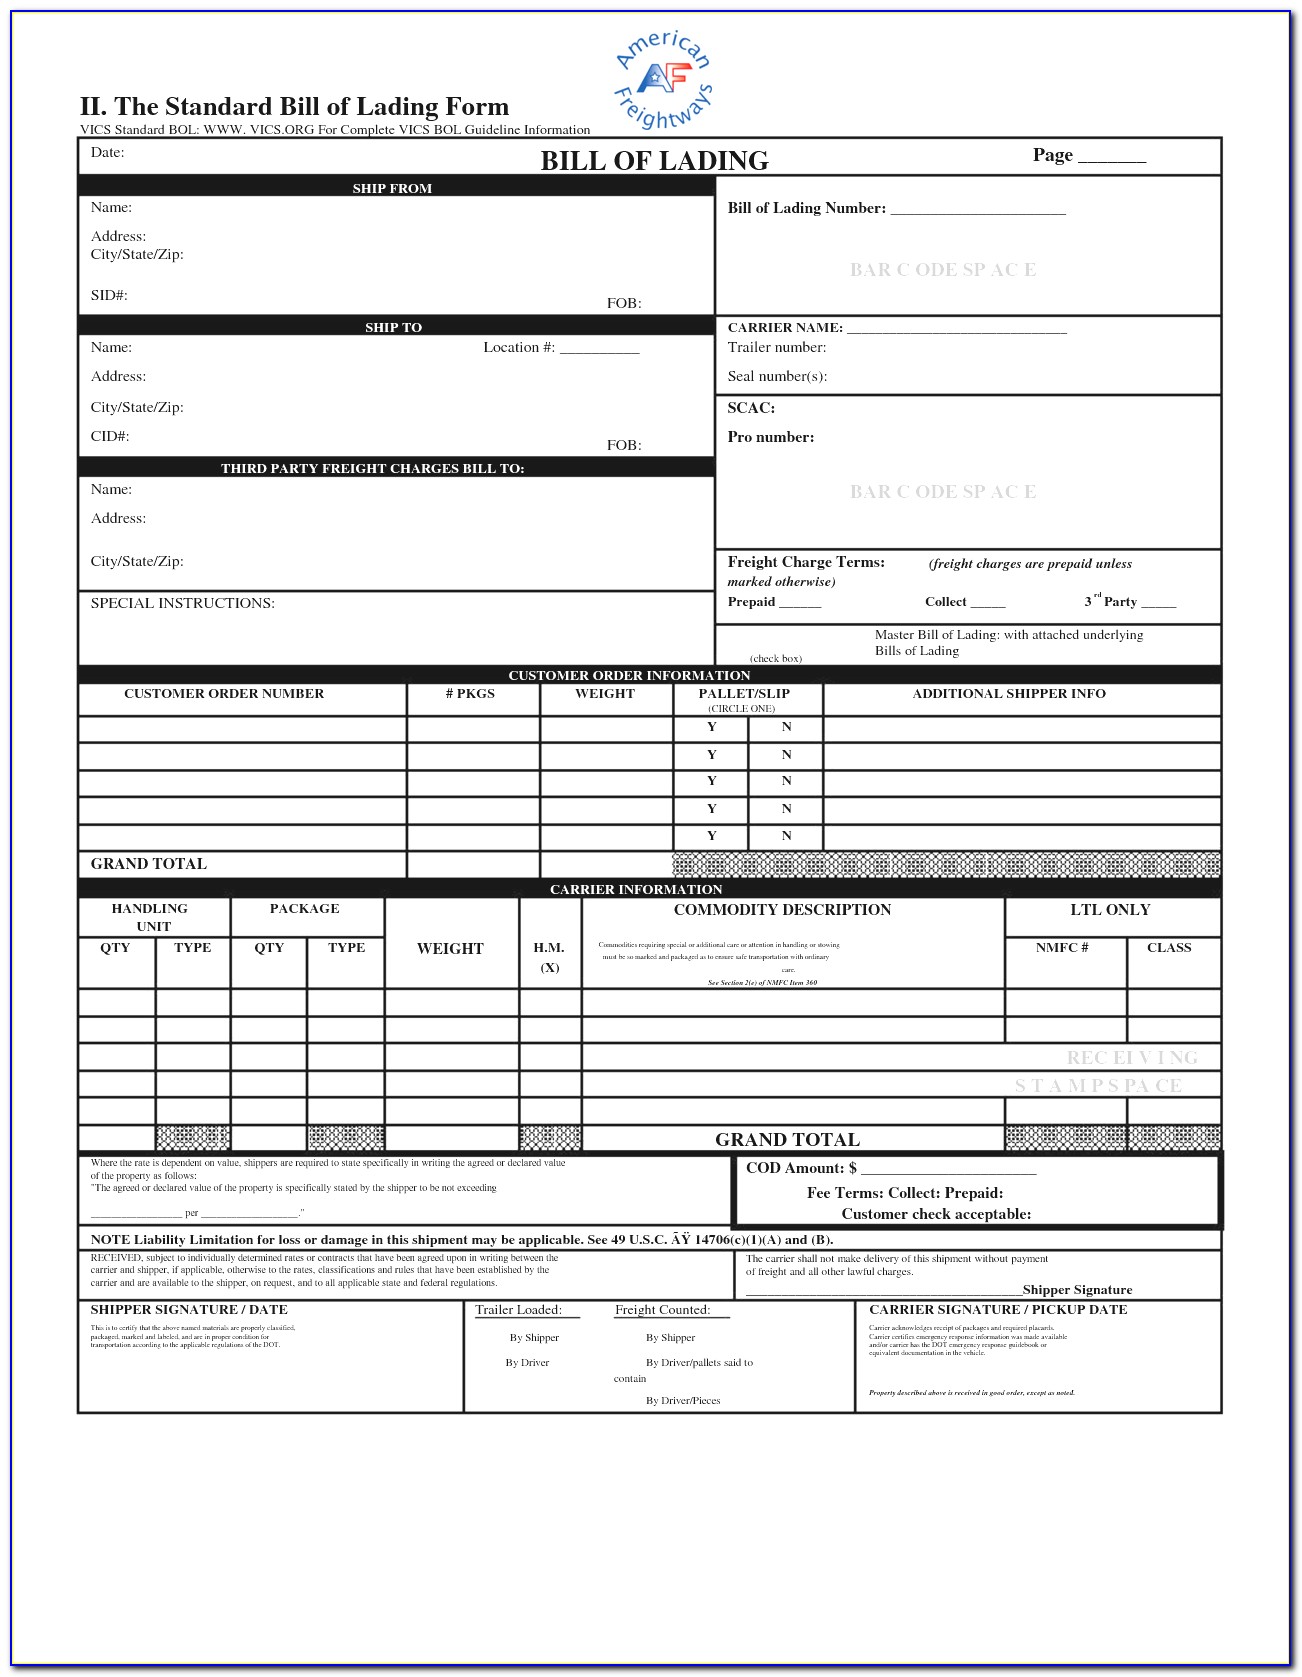 bill-of-lading-sample-pdf-master-of-template-document-free-nude-porn